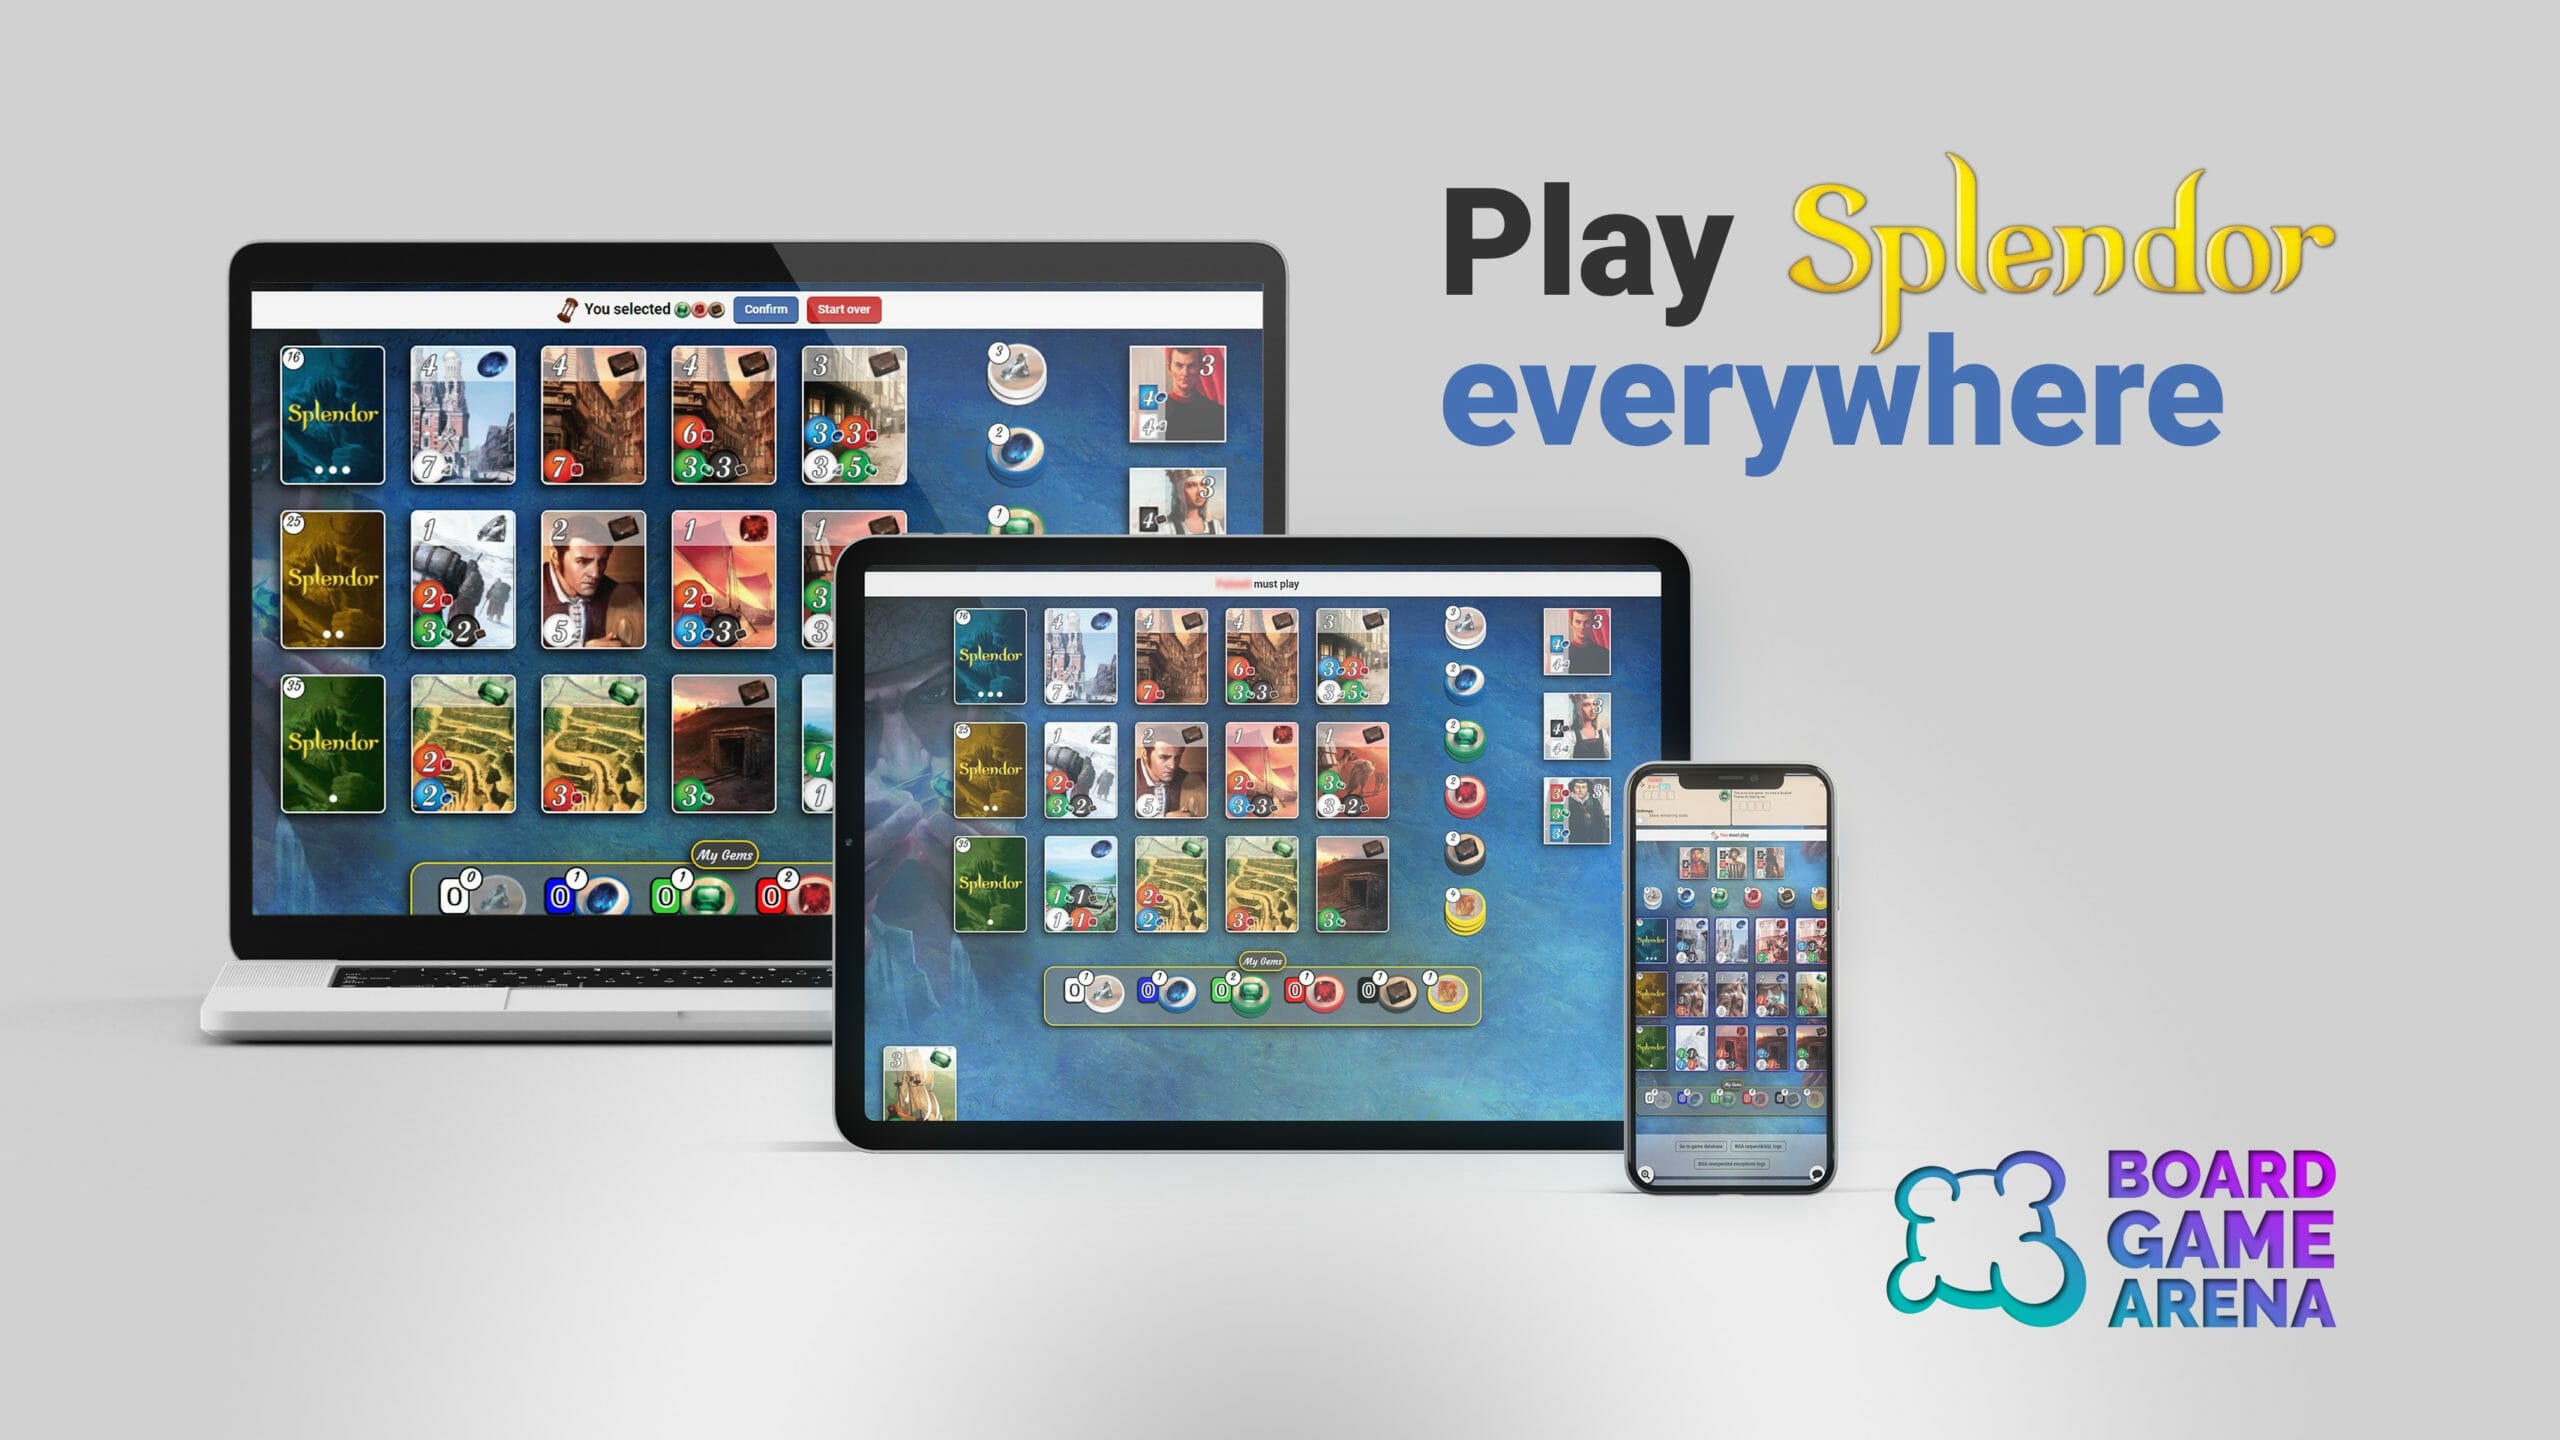 Splendor is now on Board Game Arena following Asmodee acquisition